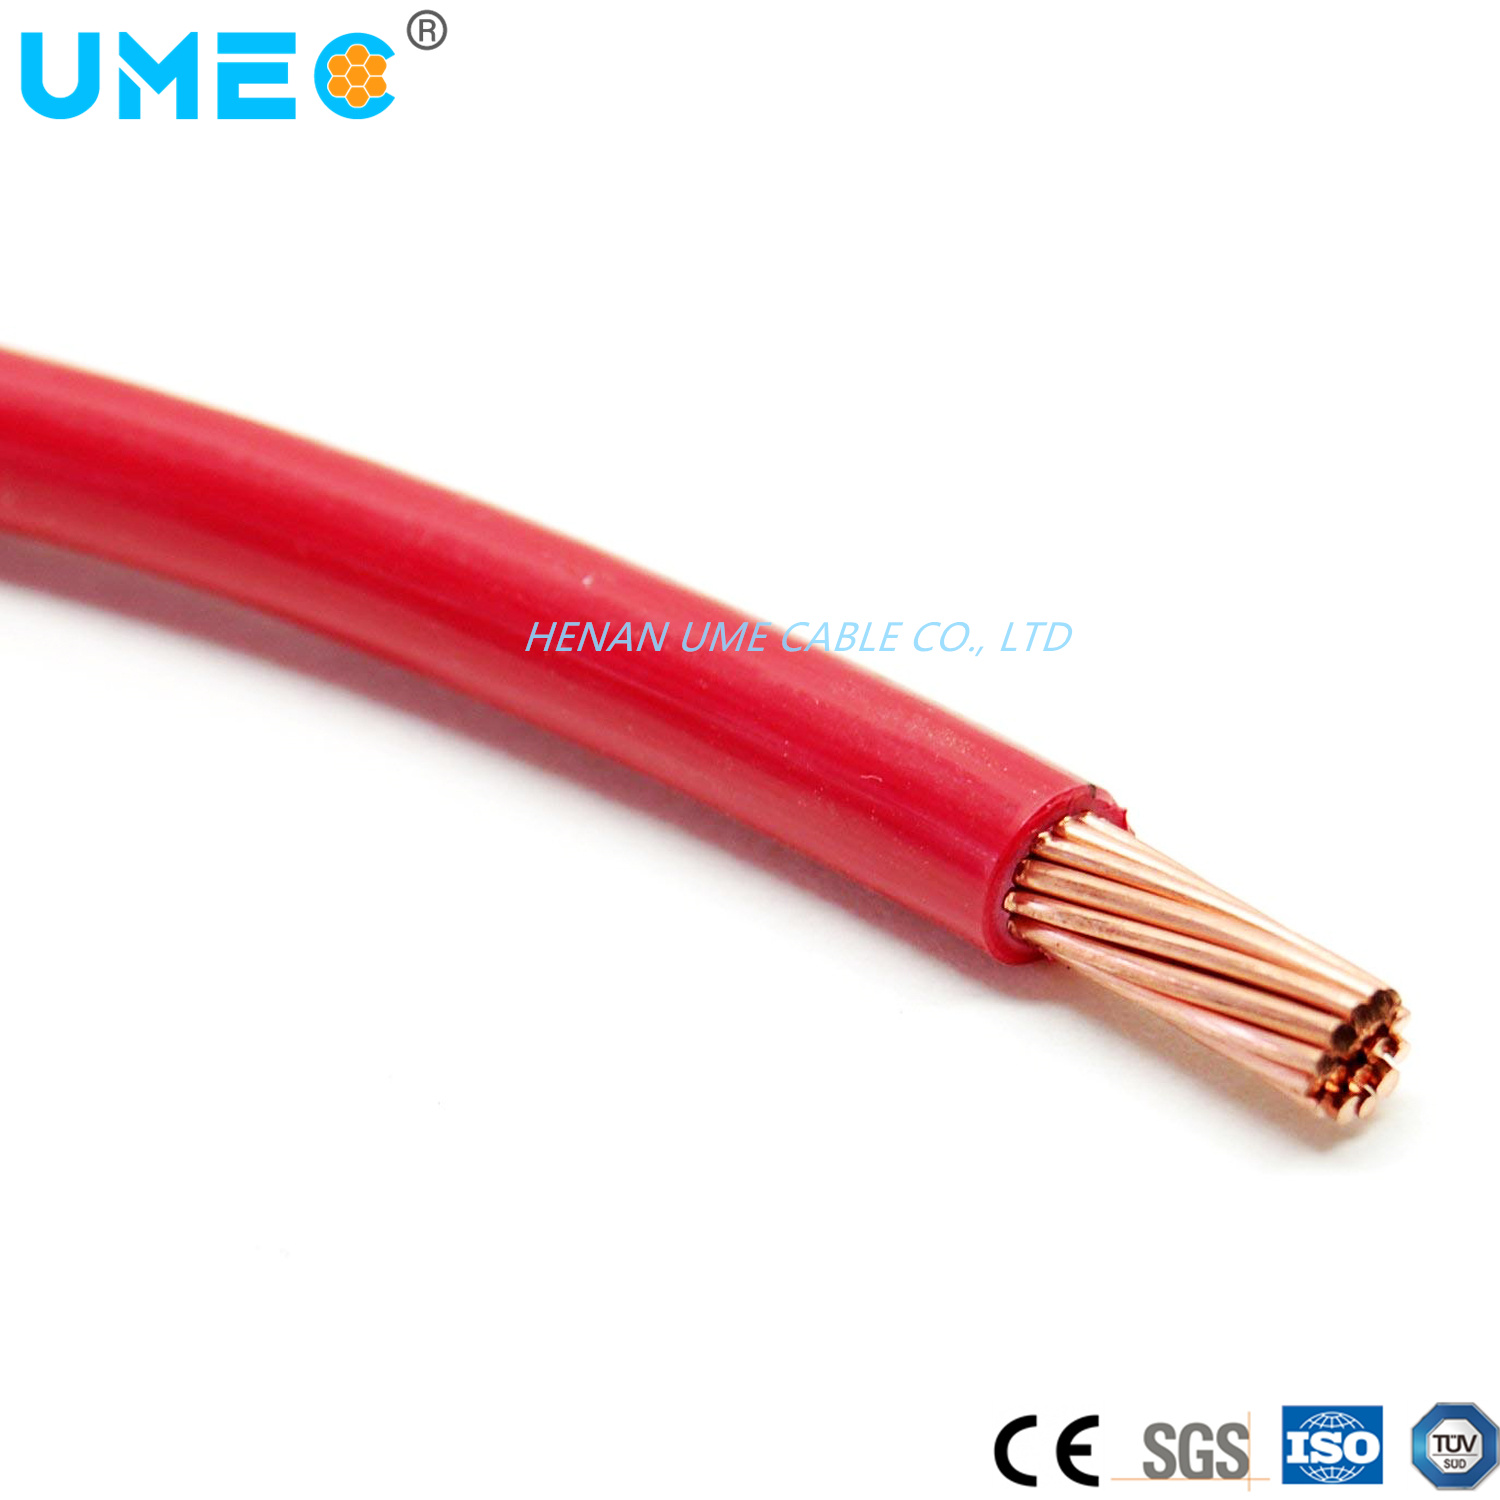 Low Voltage 600V 12/16/18gauge Stranded Flexible Thhn Thwn Nylon Cable Wire Electric Copper Cable Thw